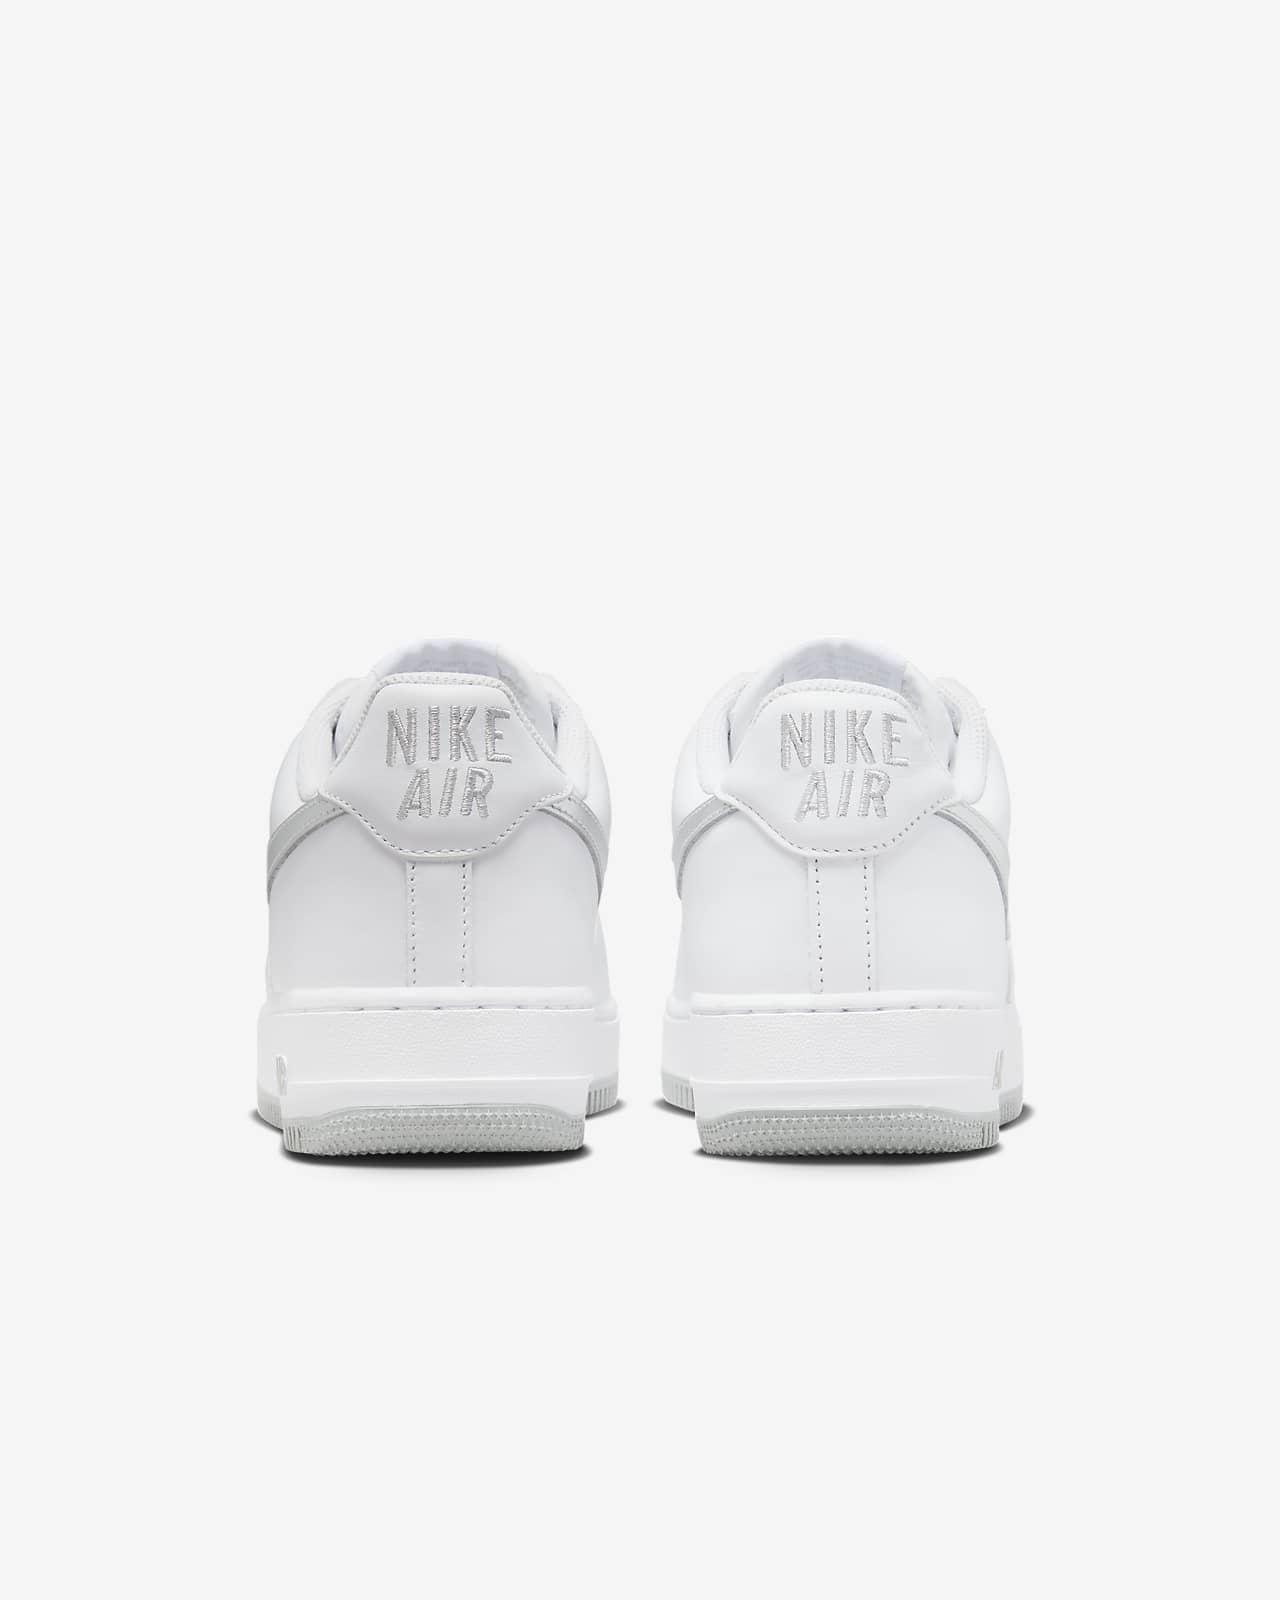 Is the Nike Air Force 1 Back?